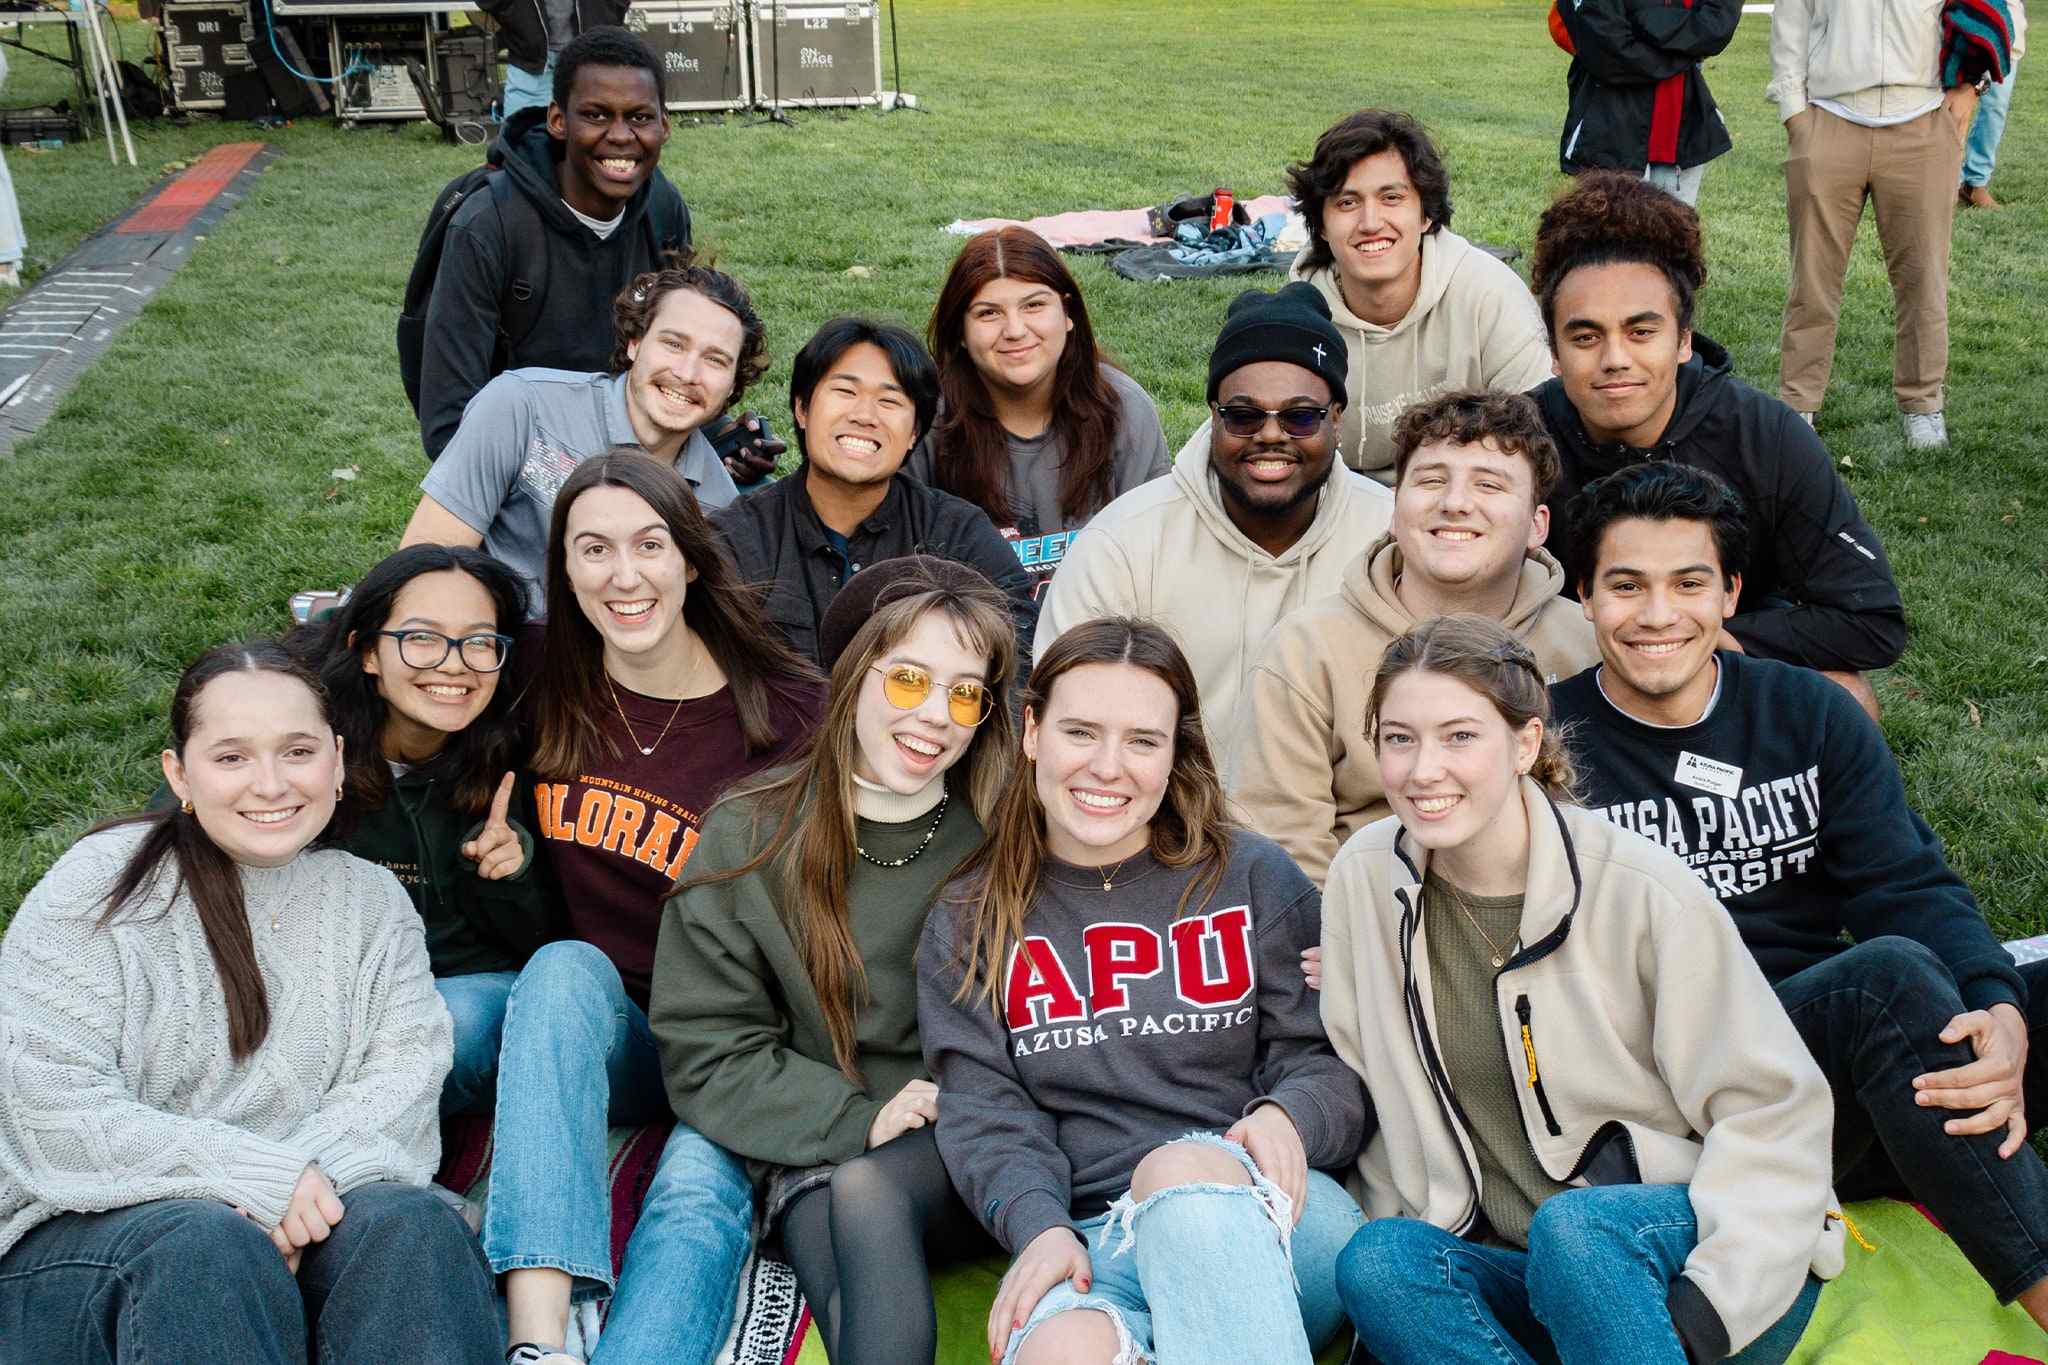 Students smiling on lawn